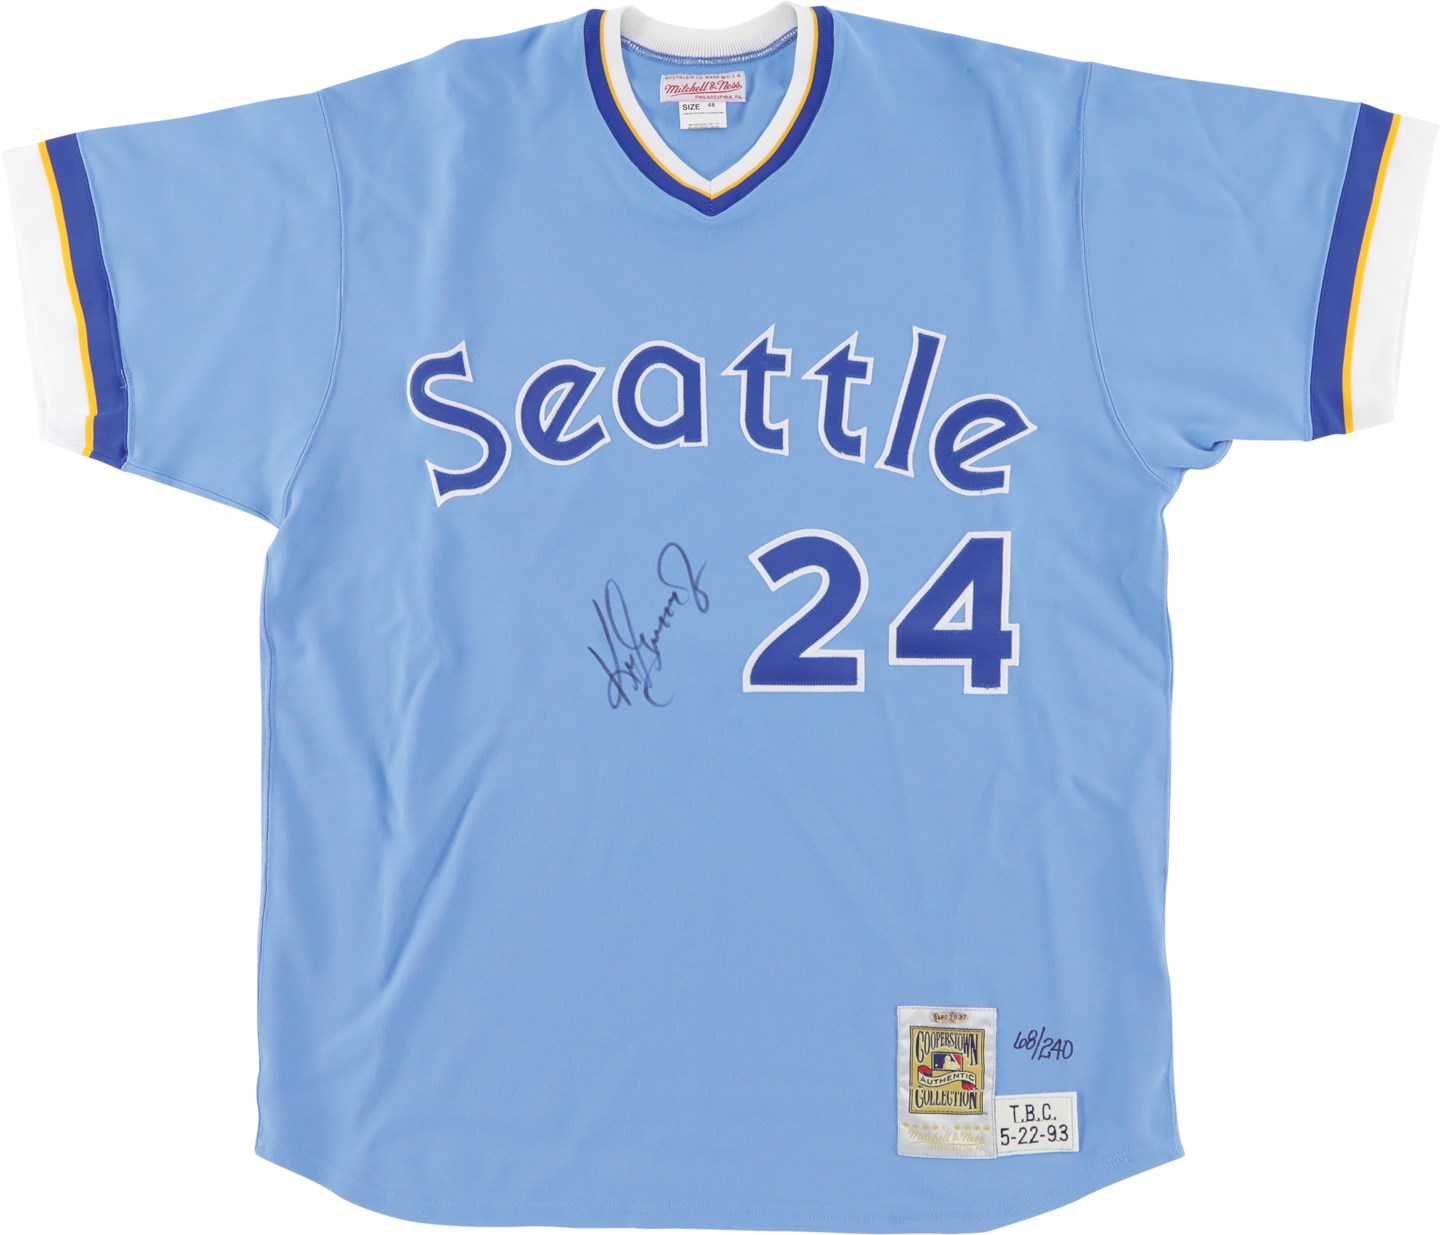 Baseball Autographs - Ken Griffey Jr, Seattle Mariners "Turn Back the Clock" Limited Edition Signed Jersey #68/240 (UDA)